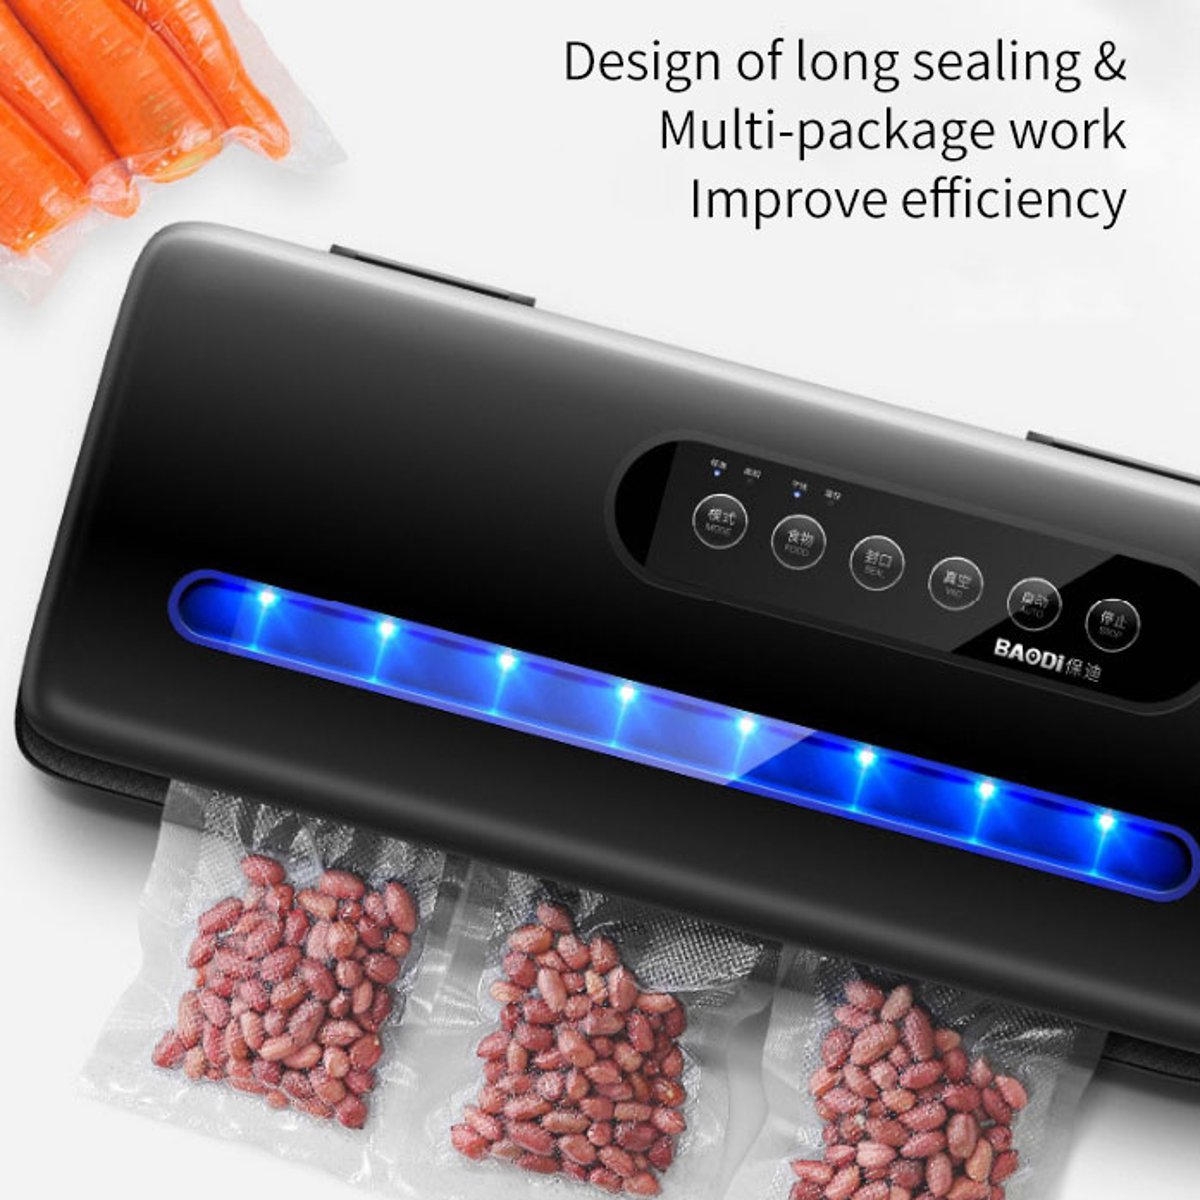 Full-automatic Electric Vacuum Sealing Machine Dry and Wet Vacuum Packaging Machine Vacuum Commercial and Household Food Sealers 220-240V 12